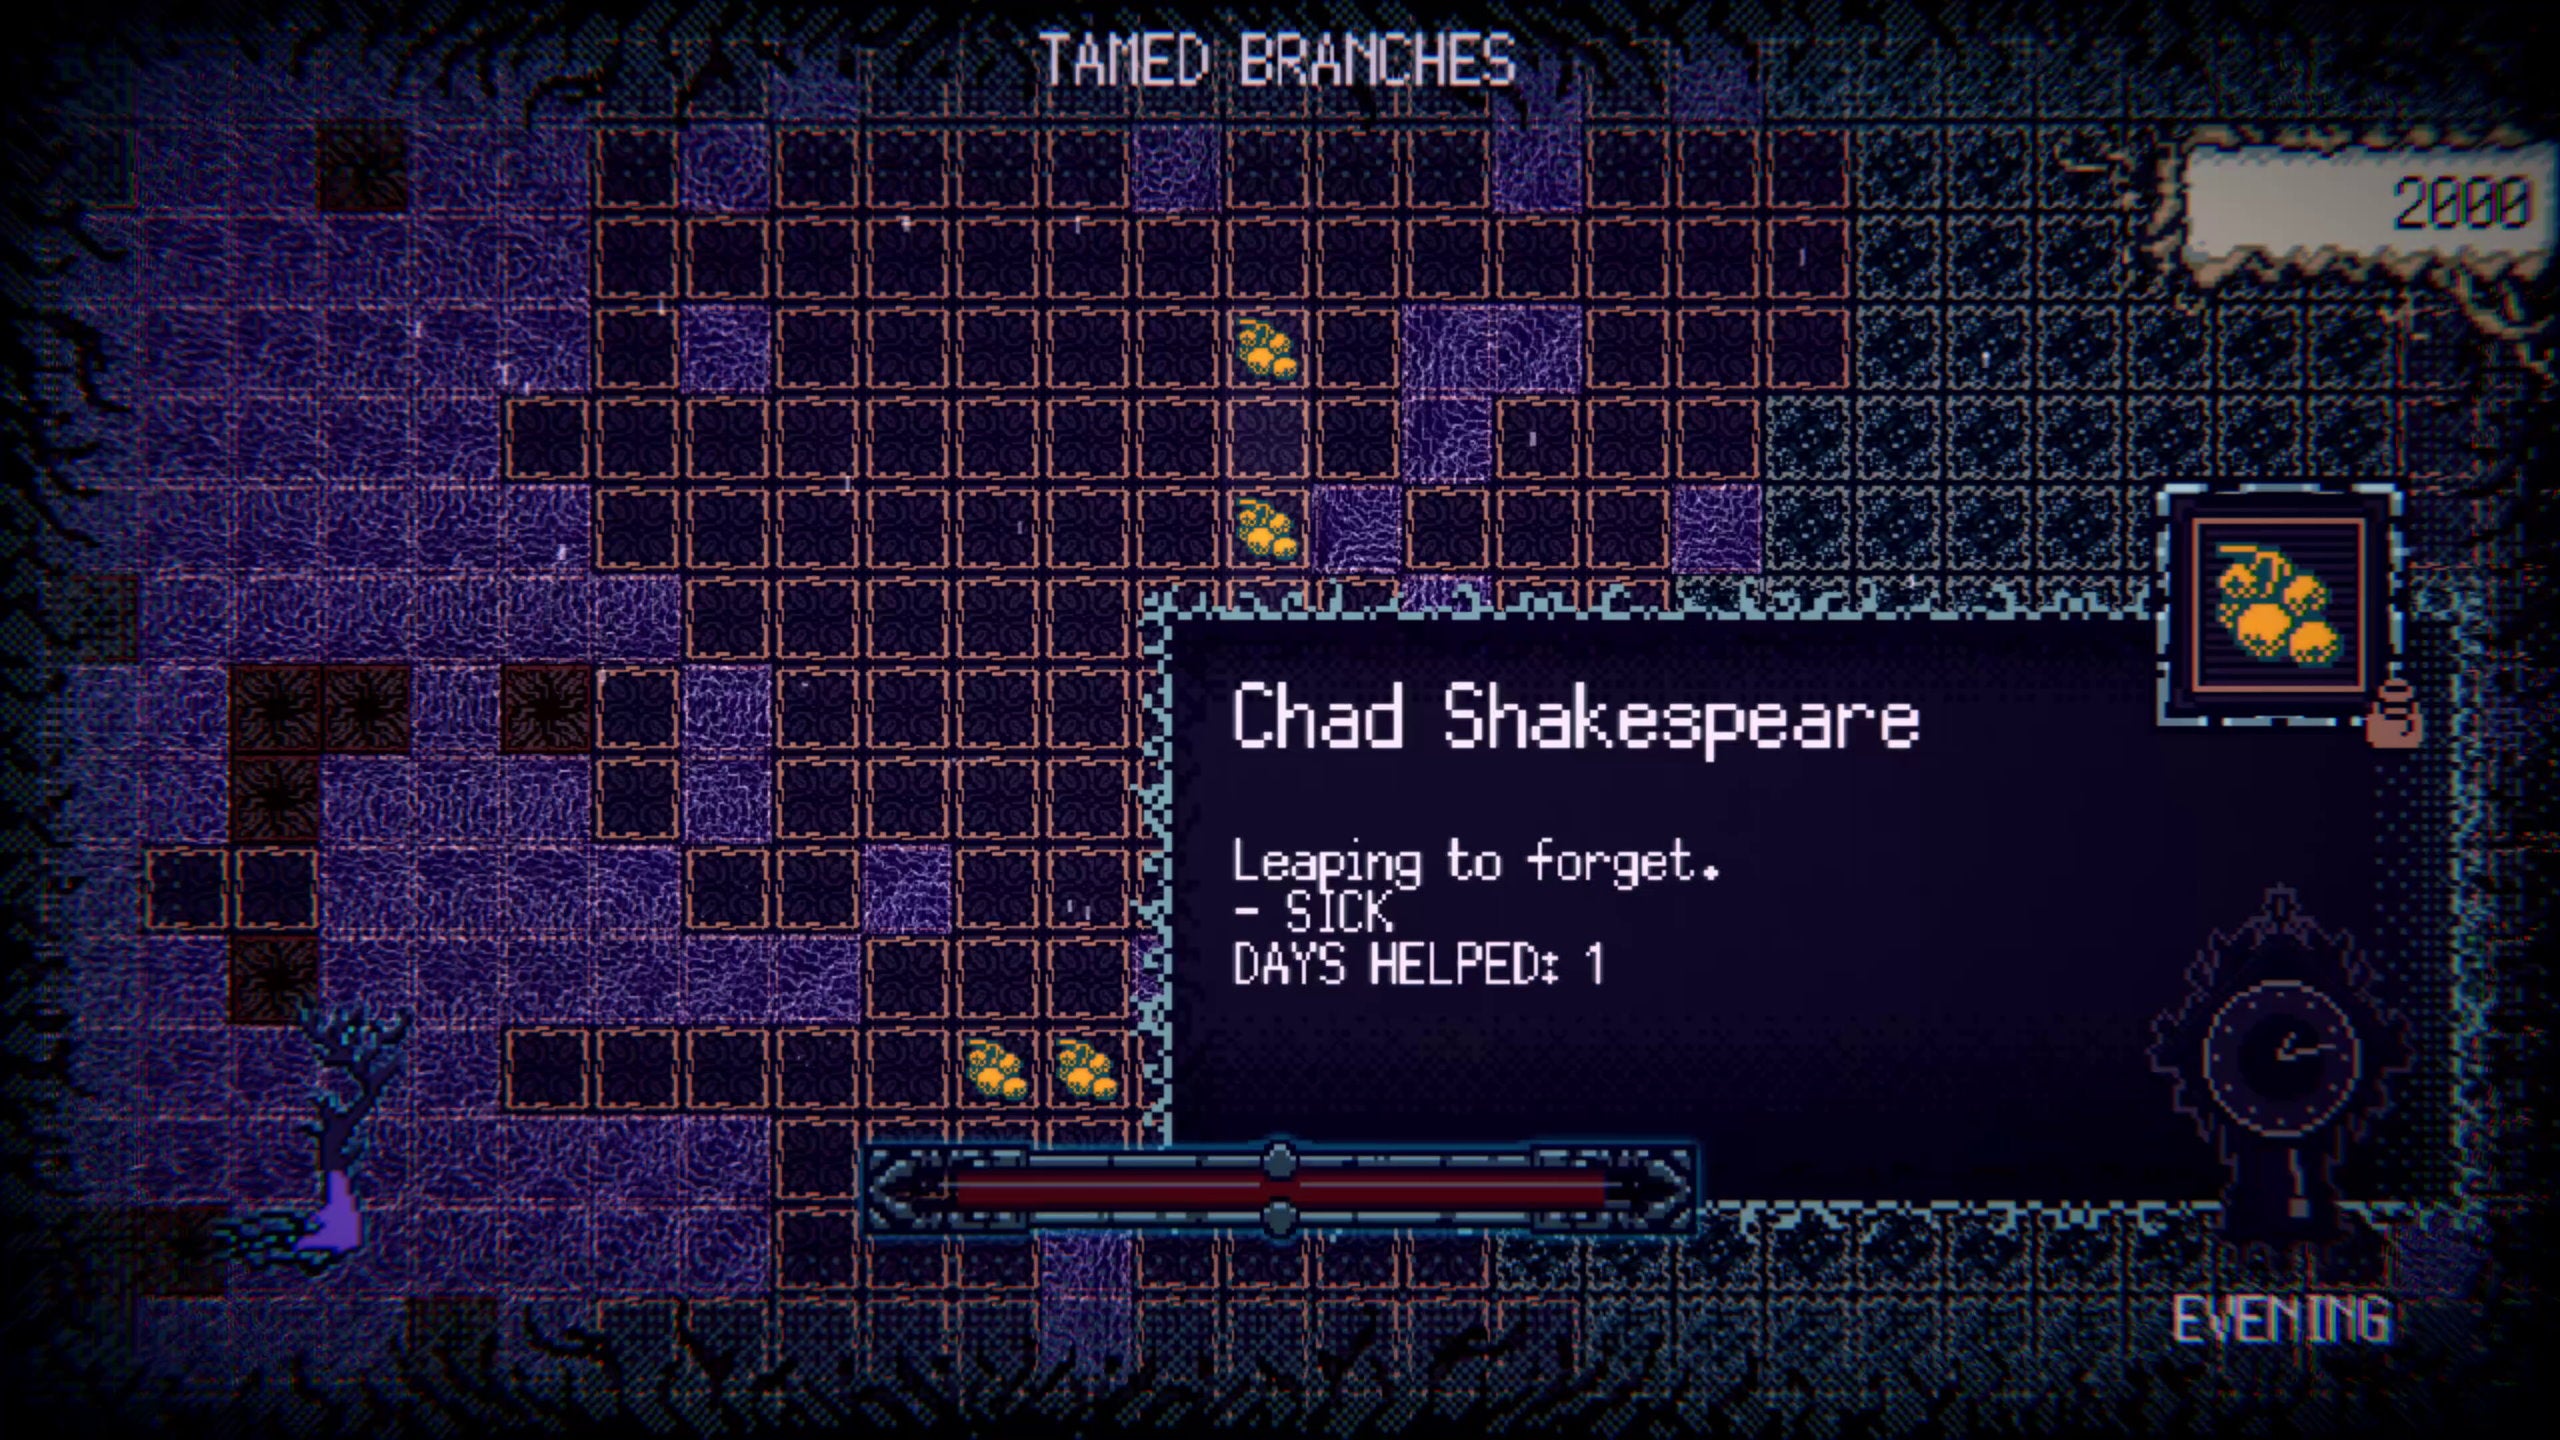 Chad Shakespeare returns in Witch Strandings